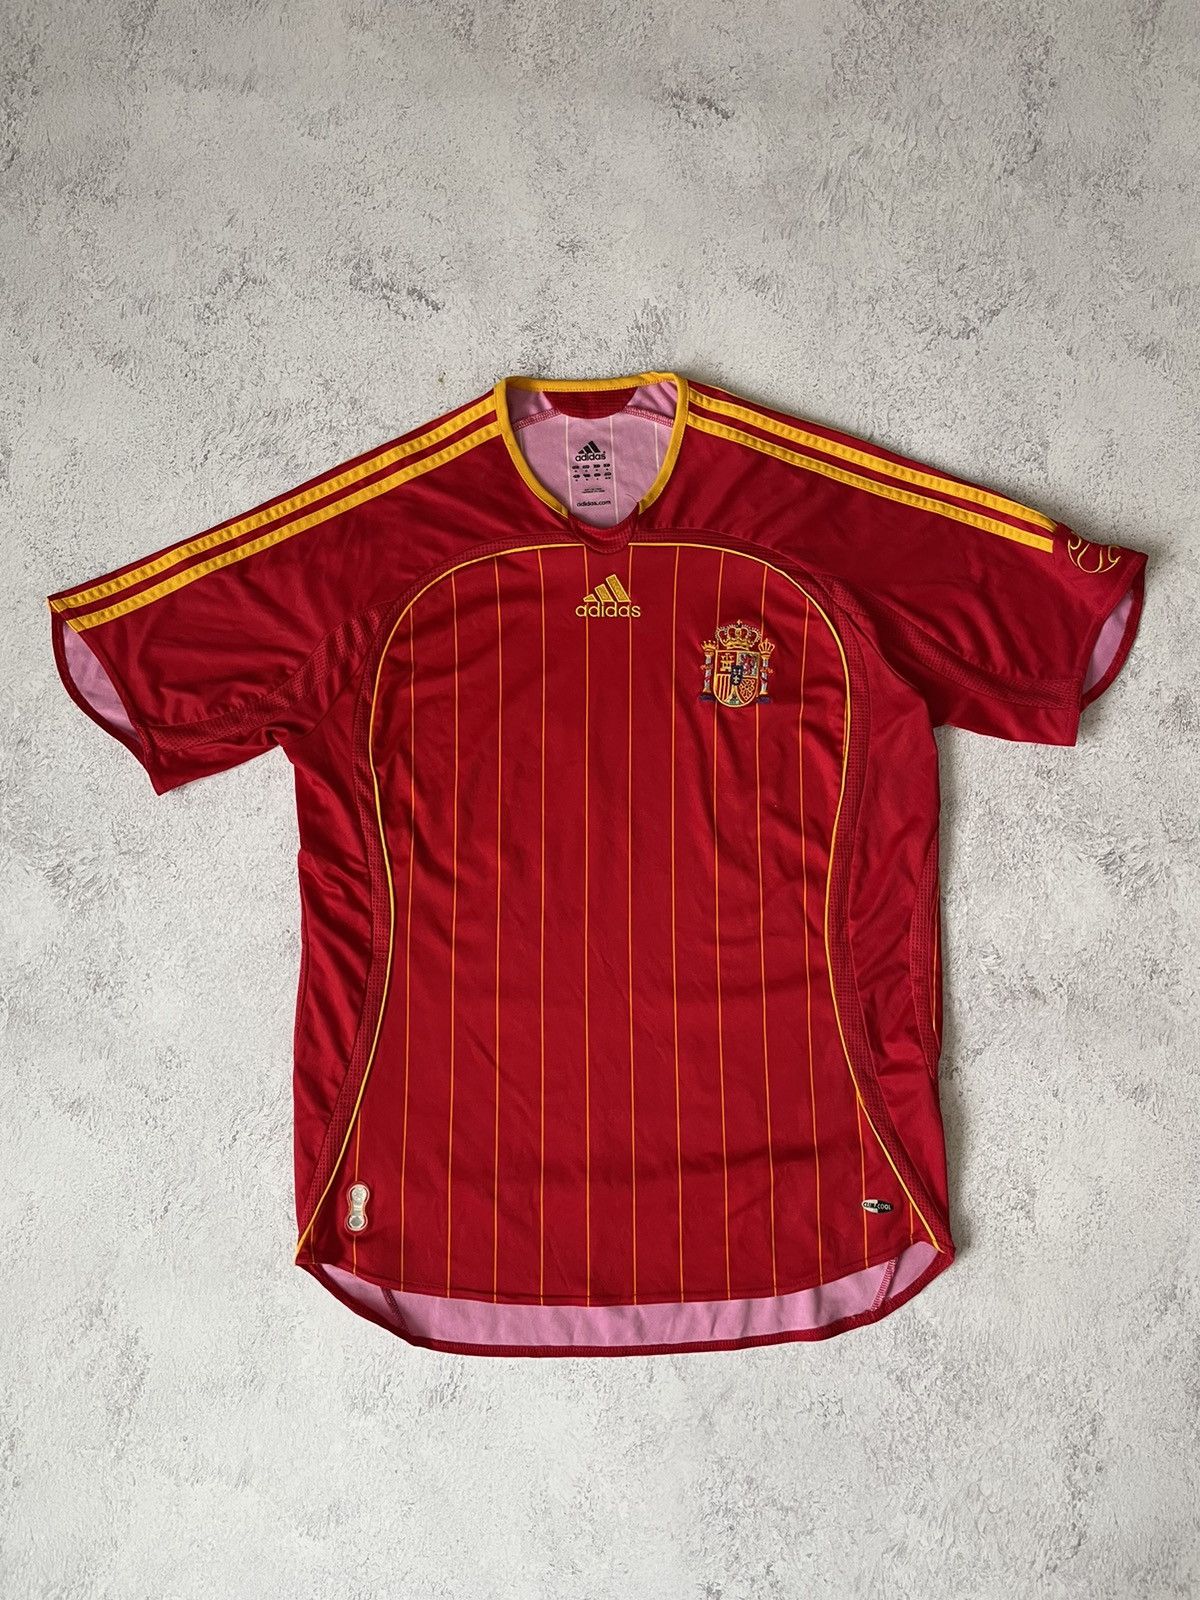 Pre-owned Adidas X Soccer Jersey Adidas Spain National Team 2006 Home Soccer Jersey Vintage In Red